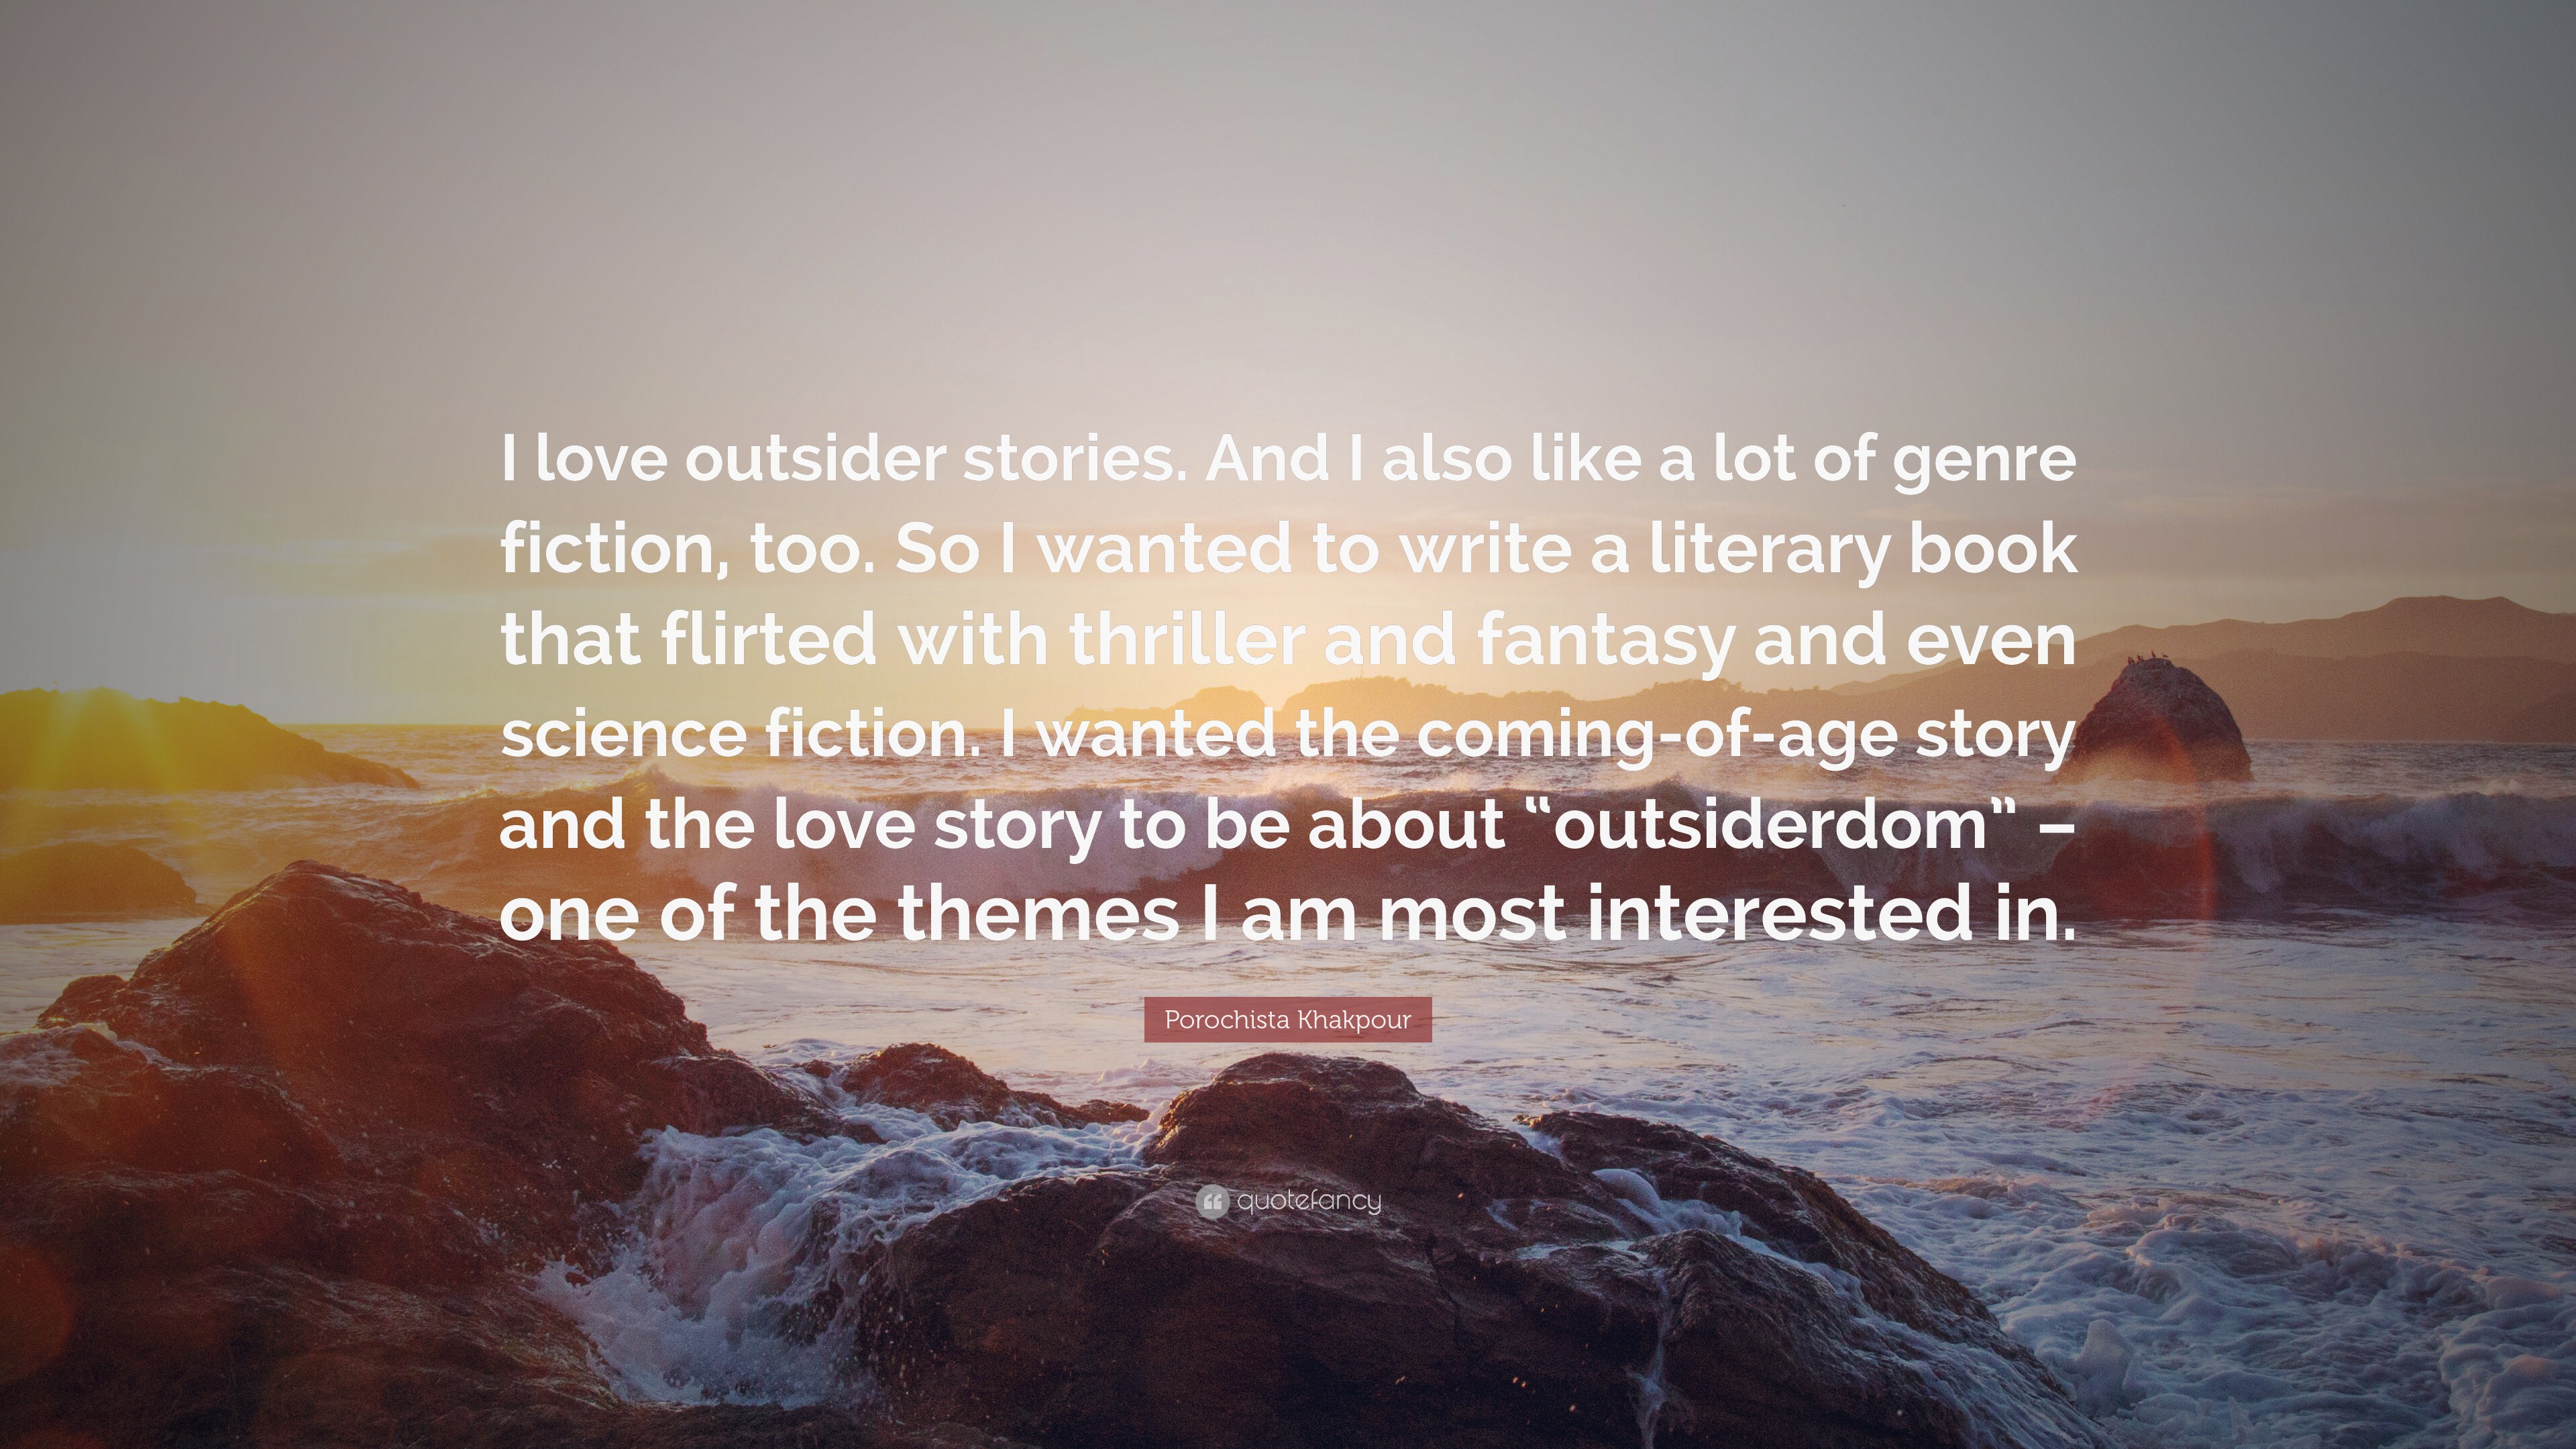 Porochista Khakpour Quote: “I love outsider stories. And I also